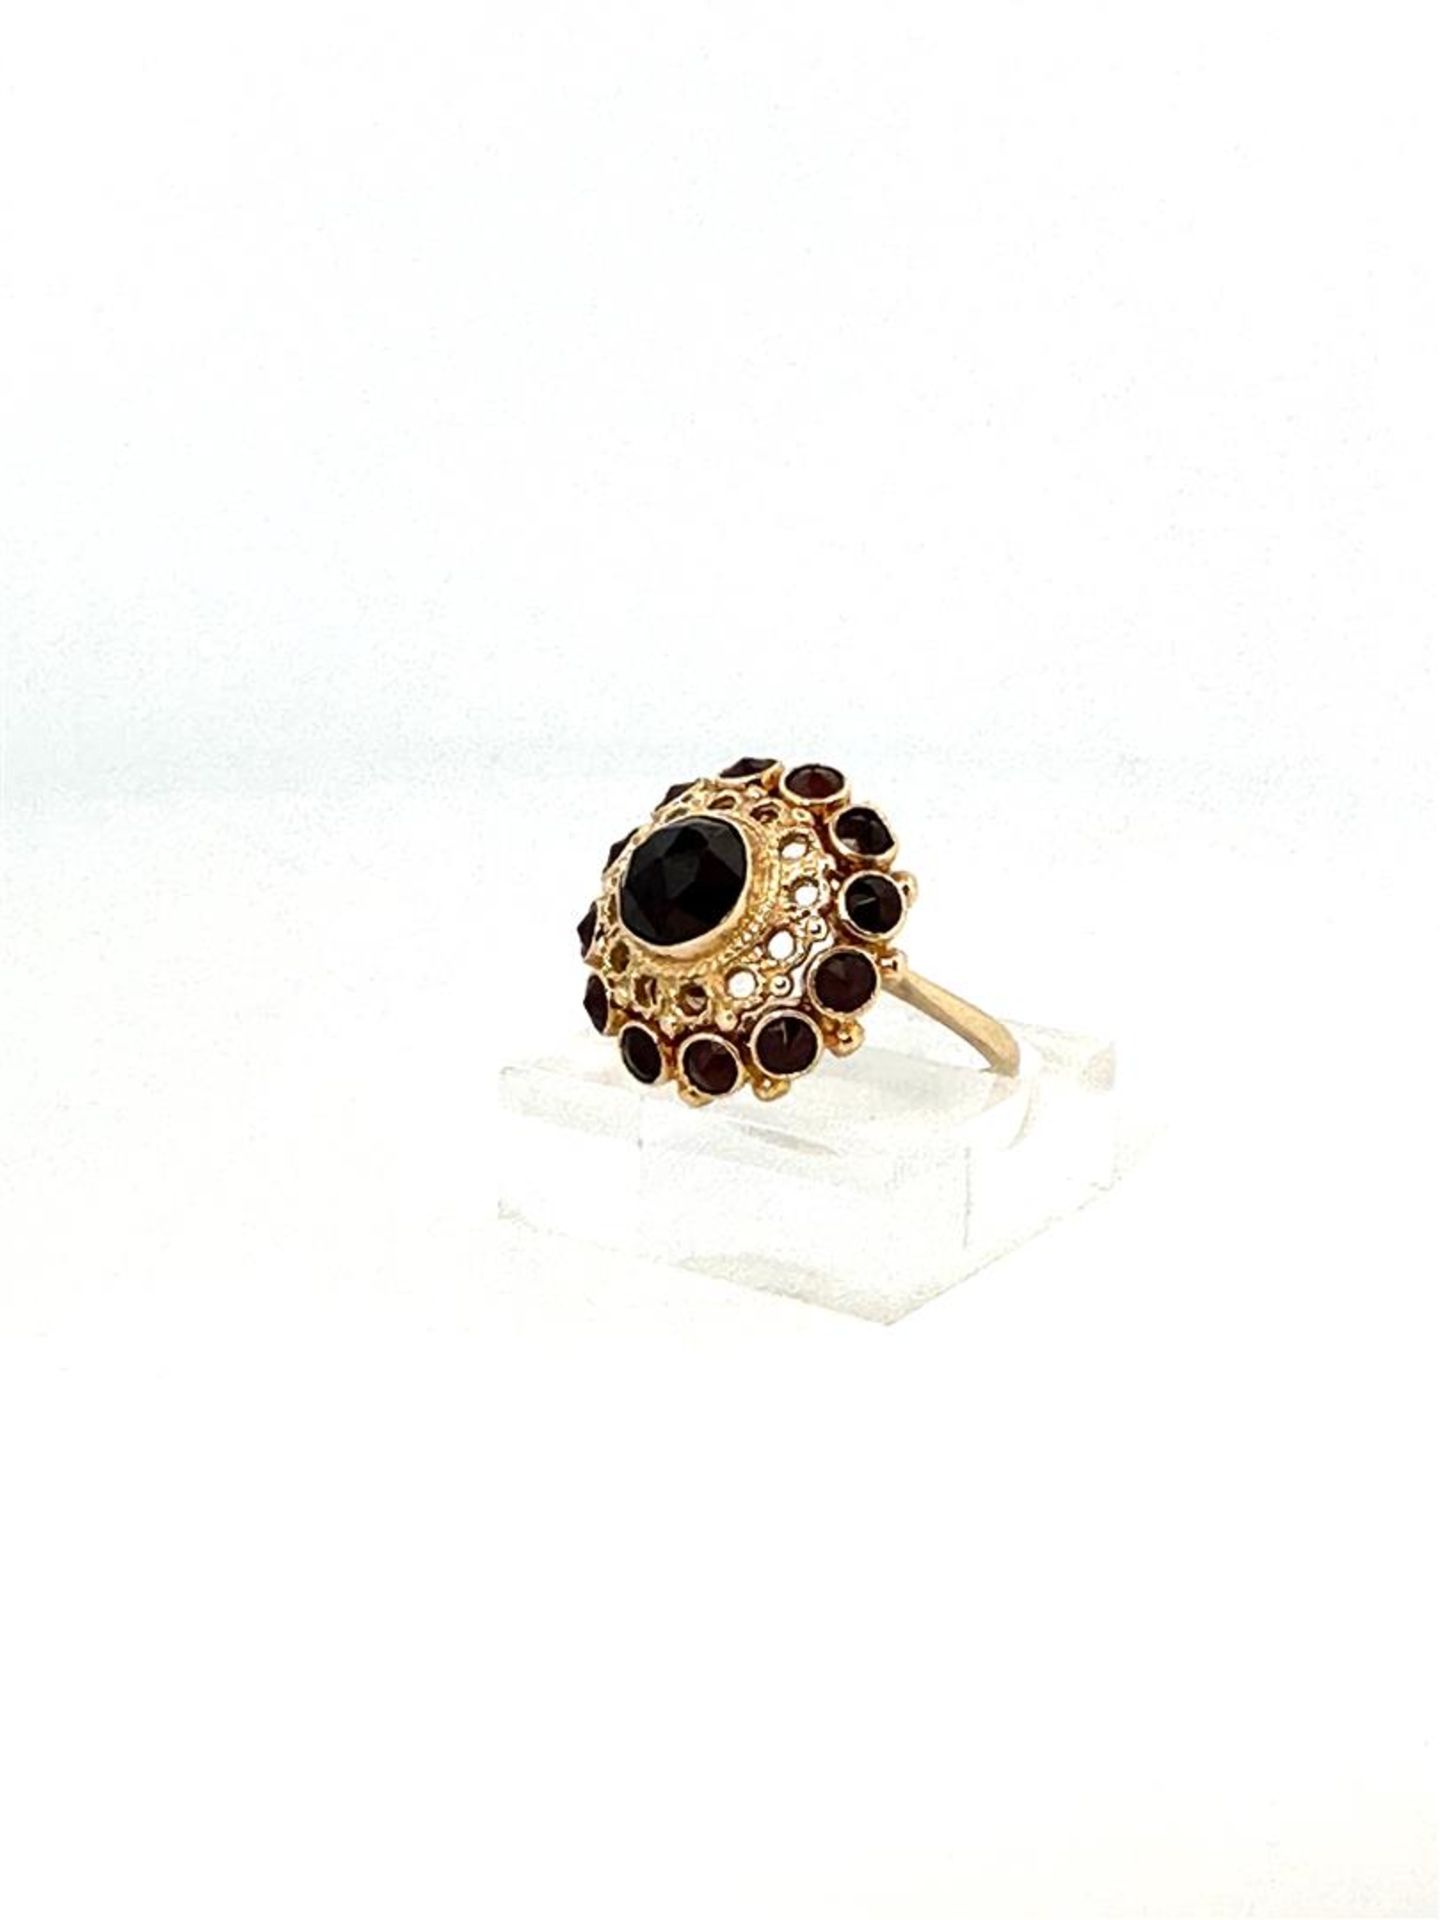 14kt yellow gold rosette ring set with garnet.
The ring is set with 1 central stone, rose cut of app - Bild 2 aus 4